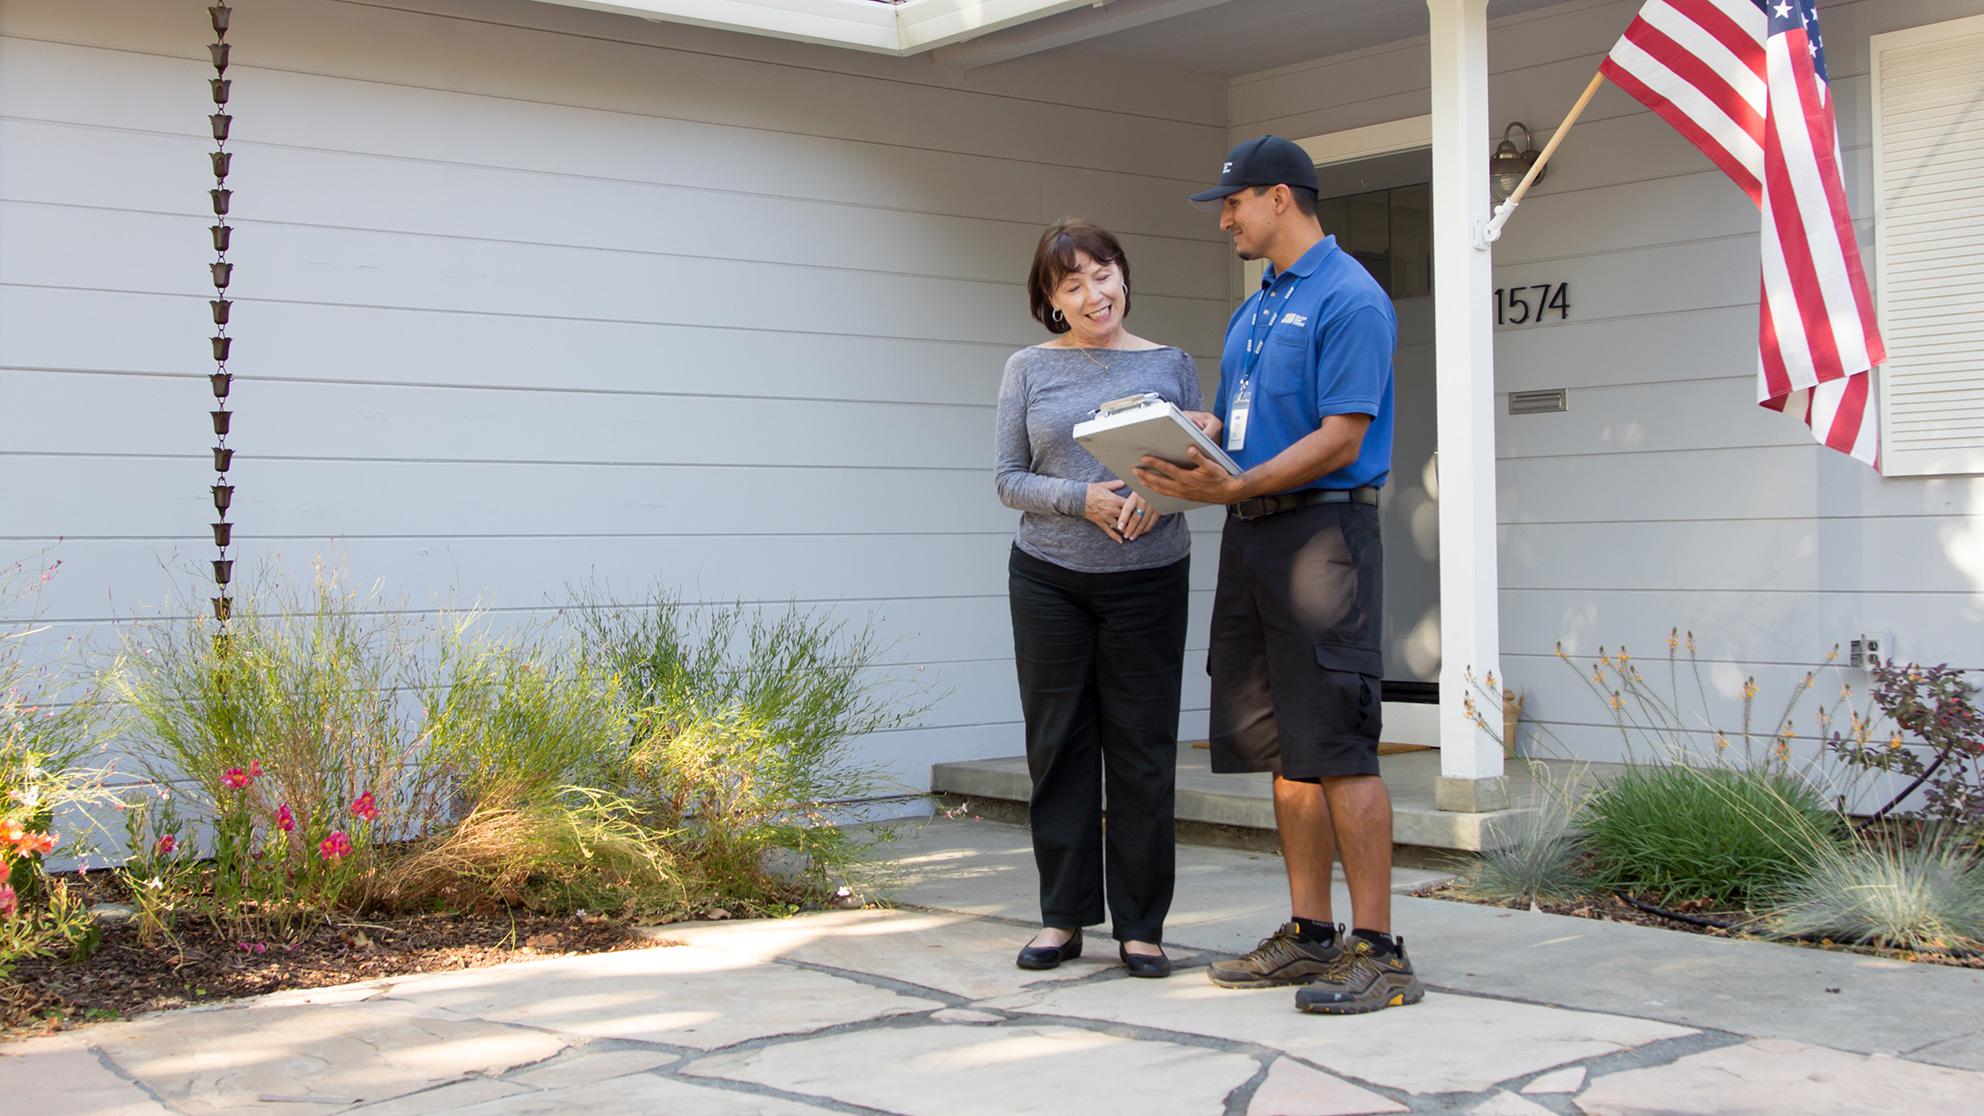 San Jose Water Worker and Customer talk outside a home